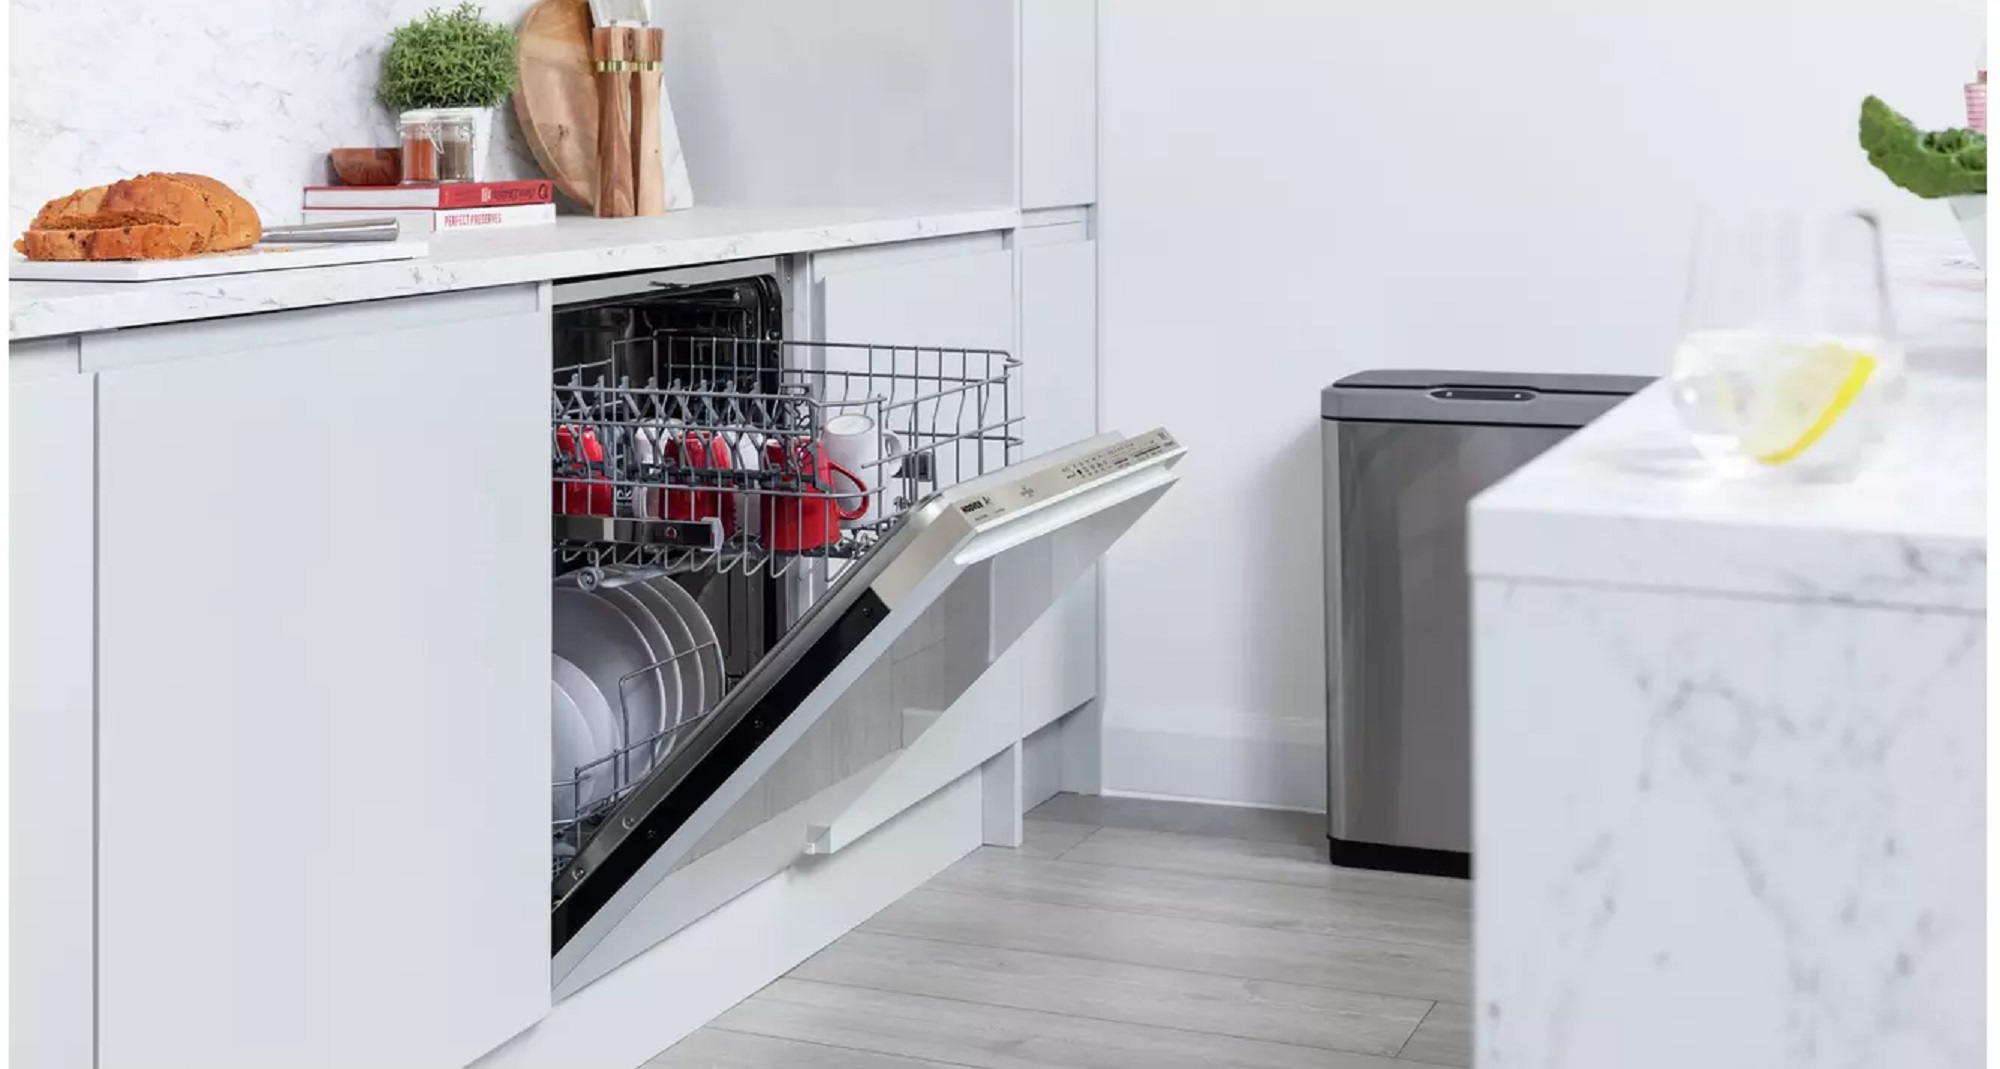 Best integrated dishwasher 2020: 6 top 